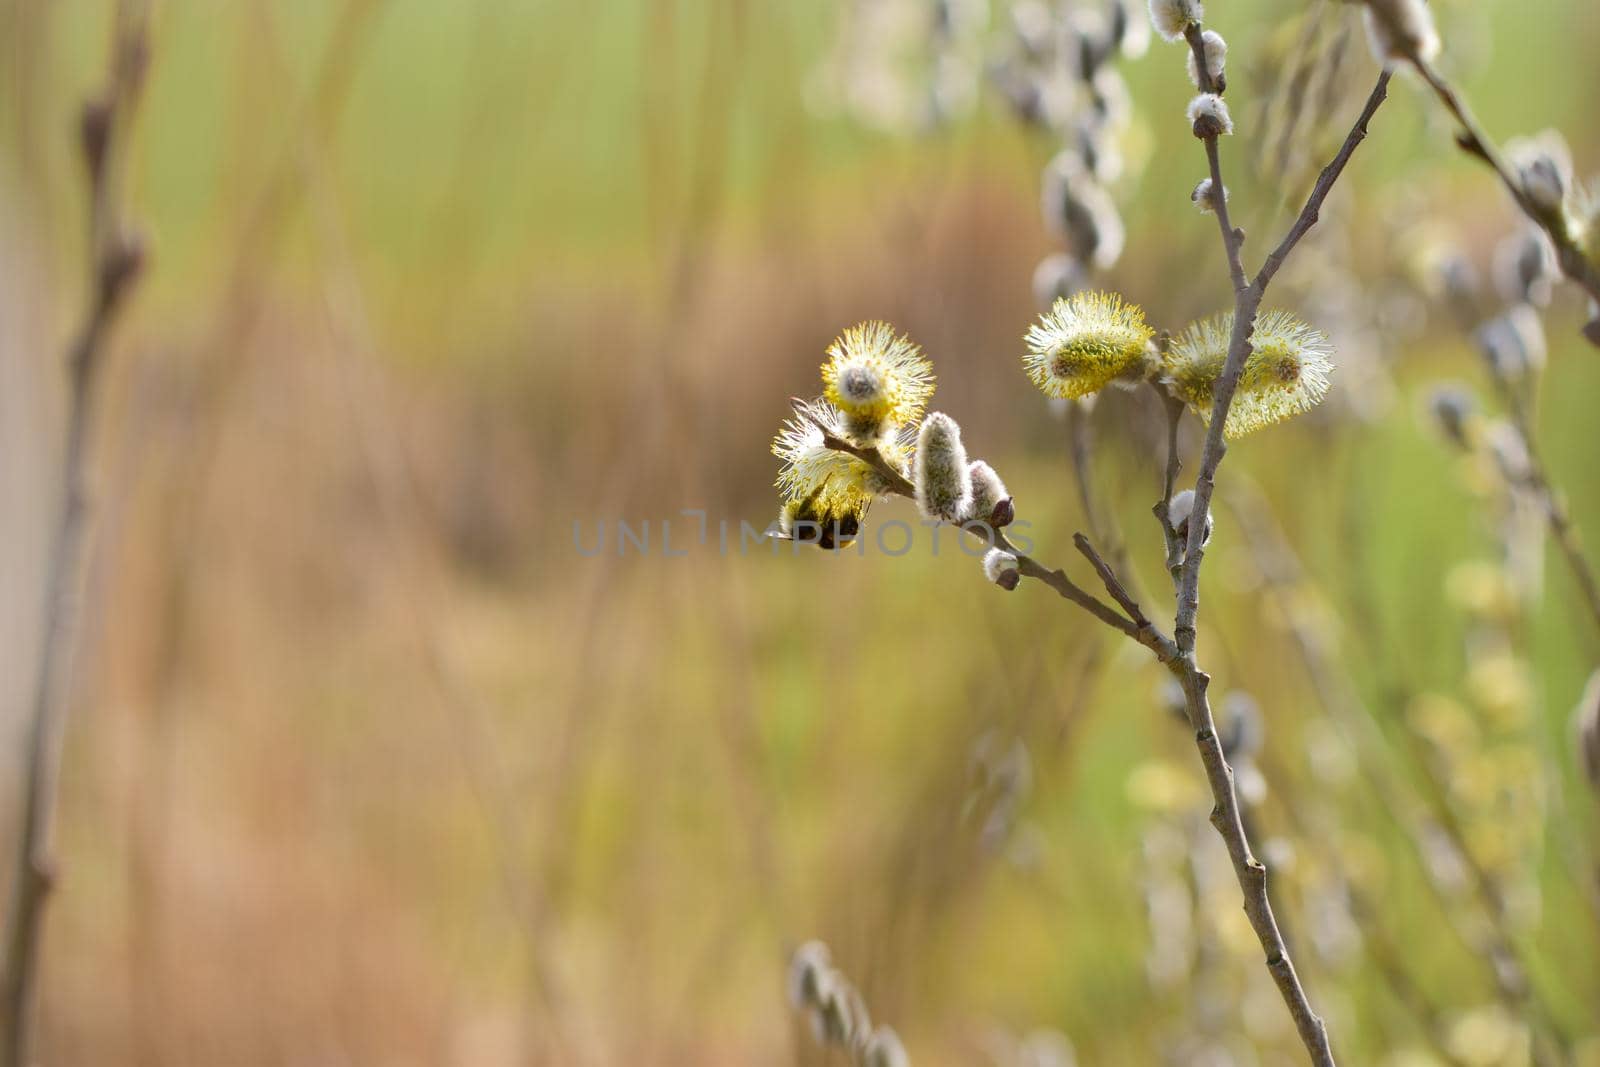 Bee on a flowering willow salicaceae against a blurred background by Luise123